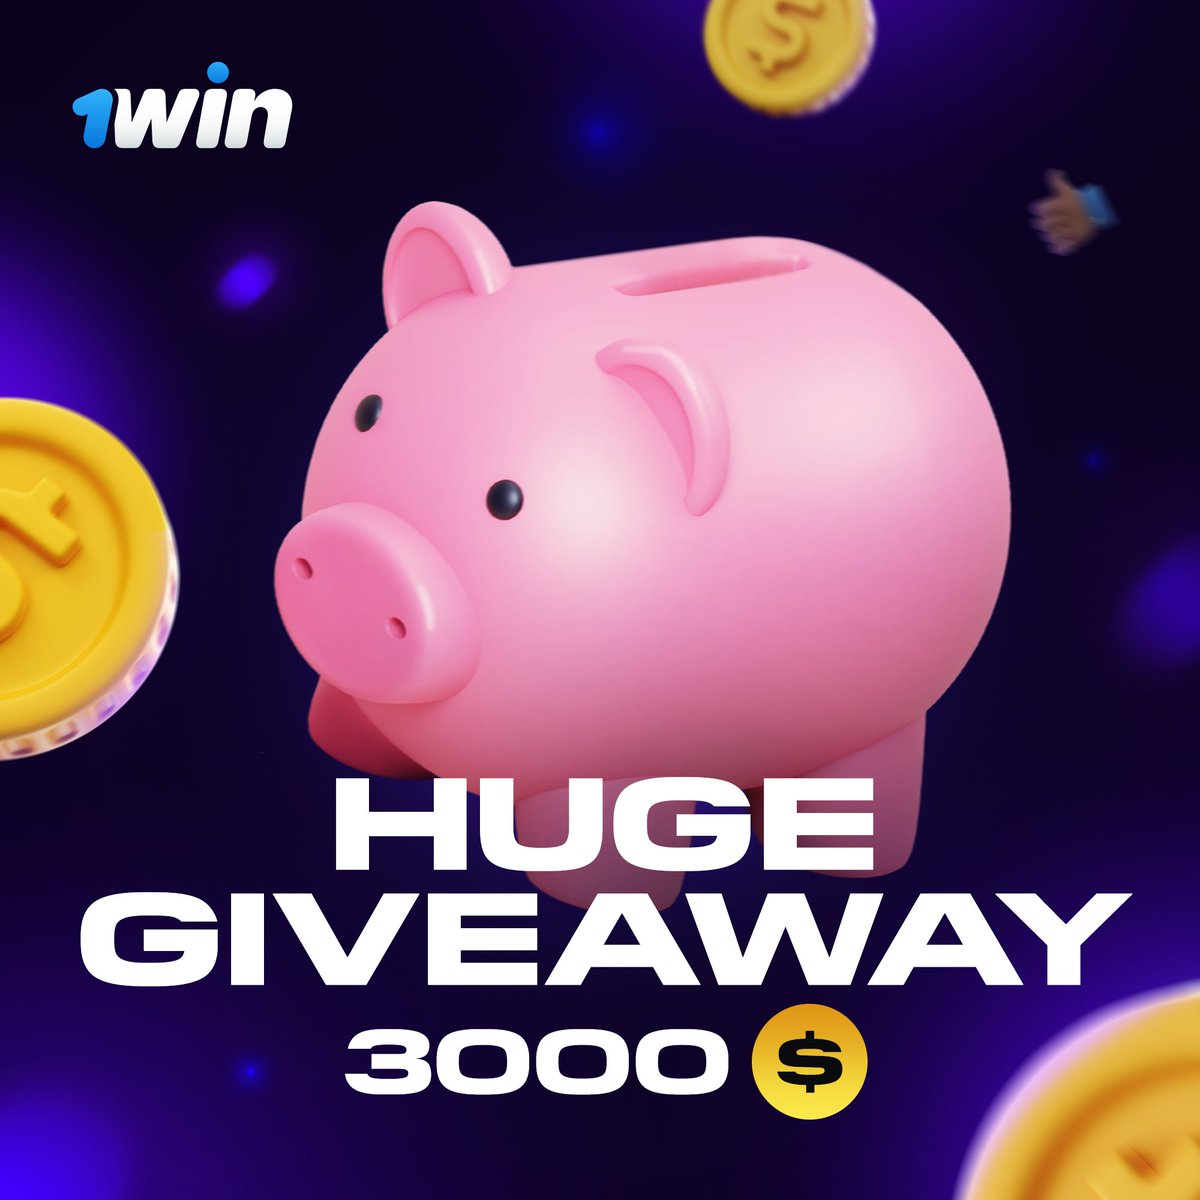 🐷 $3.000 GIVEAWAY 🐷 ✅Rules: 1. Follow @1winPro📲 2. Like💙and RT🔁 3. Tag 3 friends 👥 4. Register on @1winPro and leave your 1win ID in comments👇 2️⃣0️⃣0️⃣ WINNERS 🗓Results: January 23-24 🔗cutt.ly/n9qNkOn | #1win | #Giveaways | #Giveaway | #PrizePicksmas